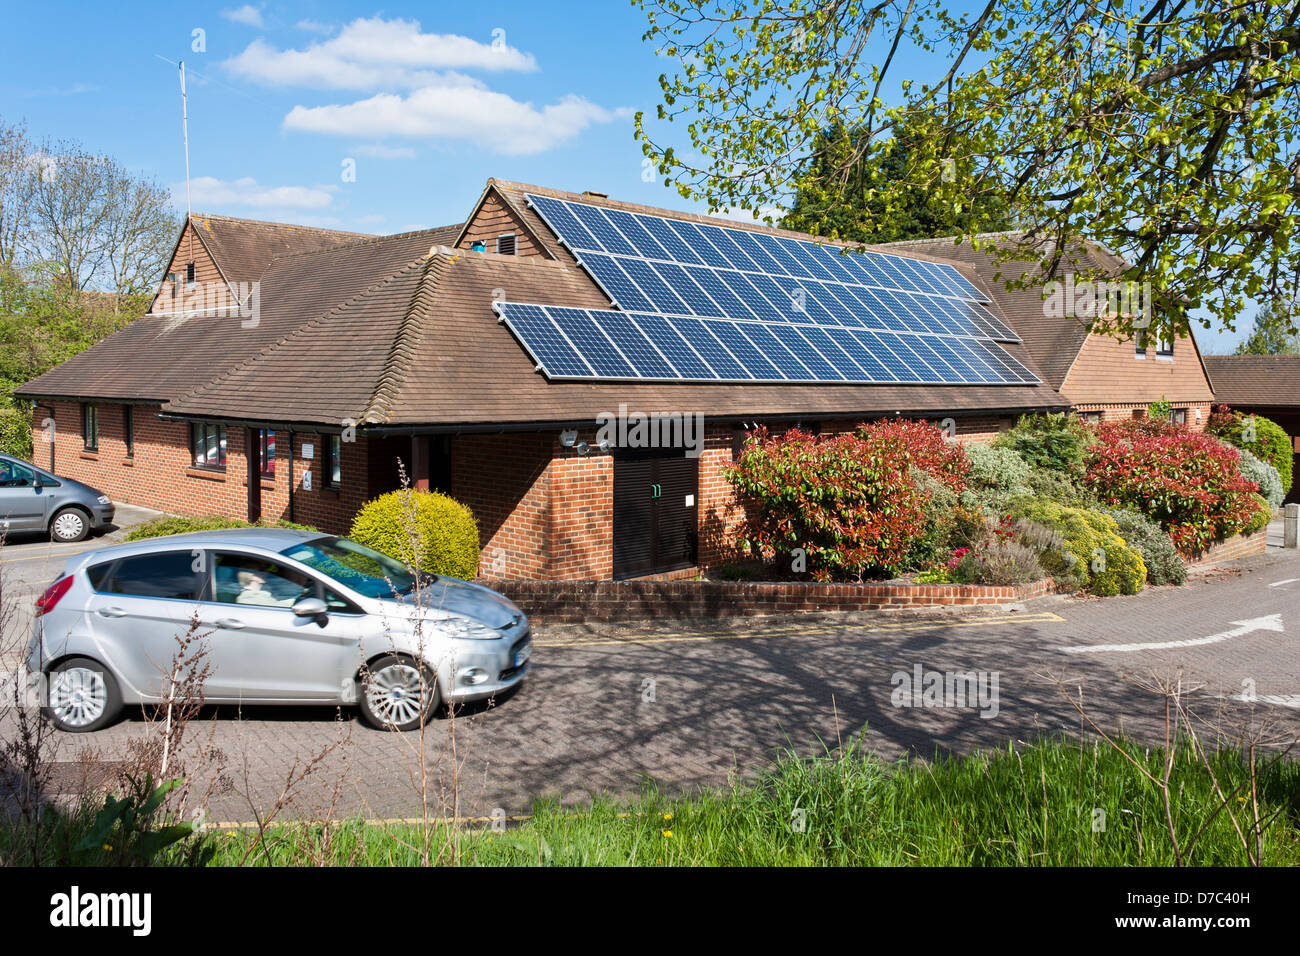 Solar panels fitted to the roof of a NHS GP surgery Reading, Berkshire, England, GB, UK. Stock Photo